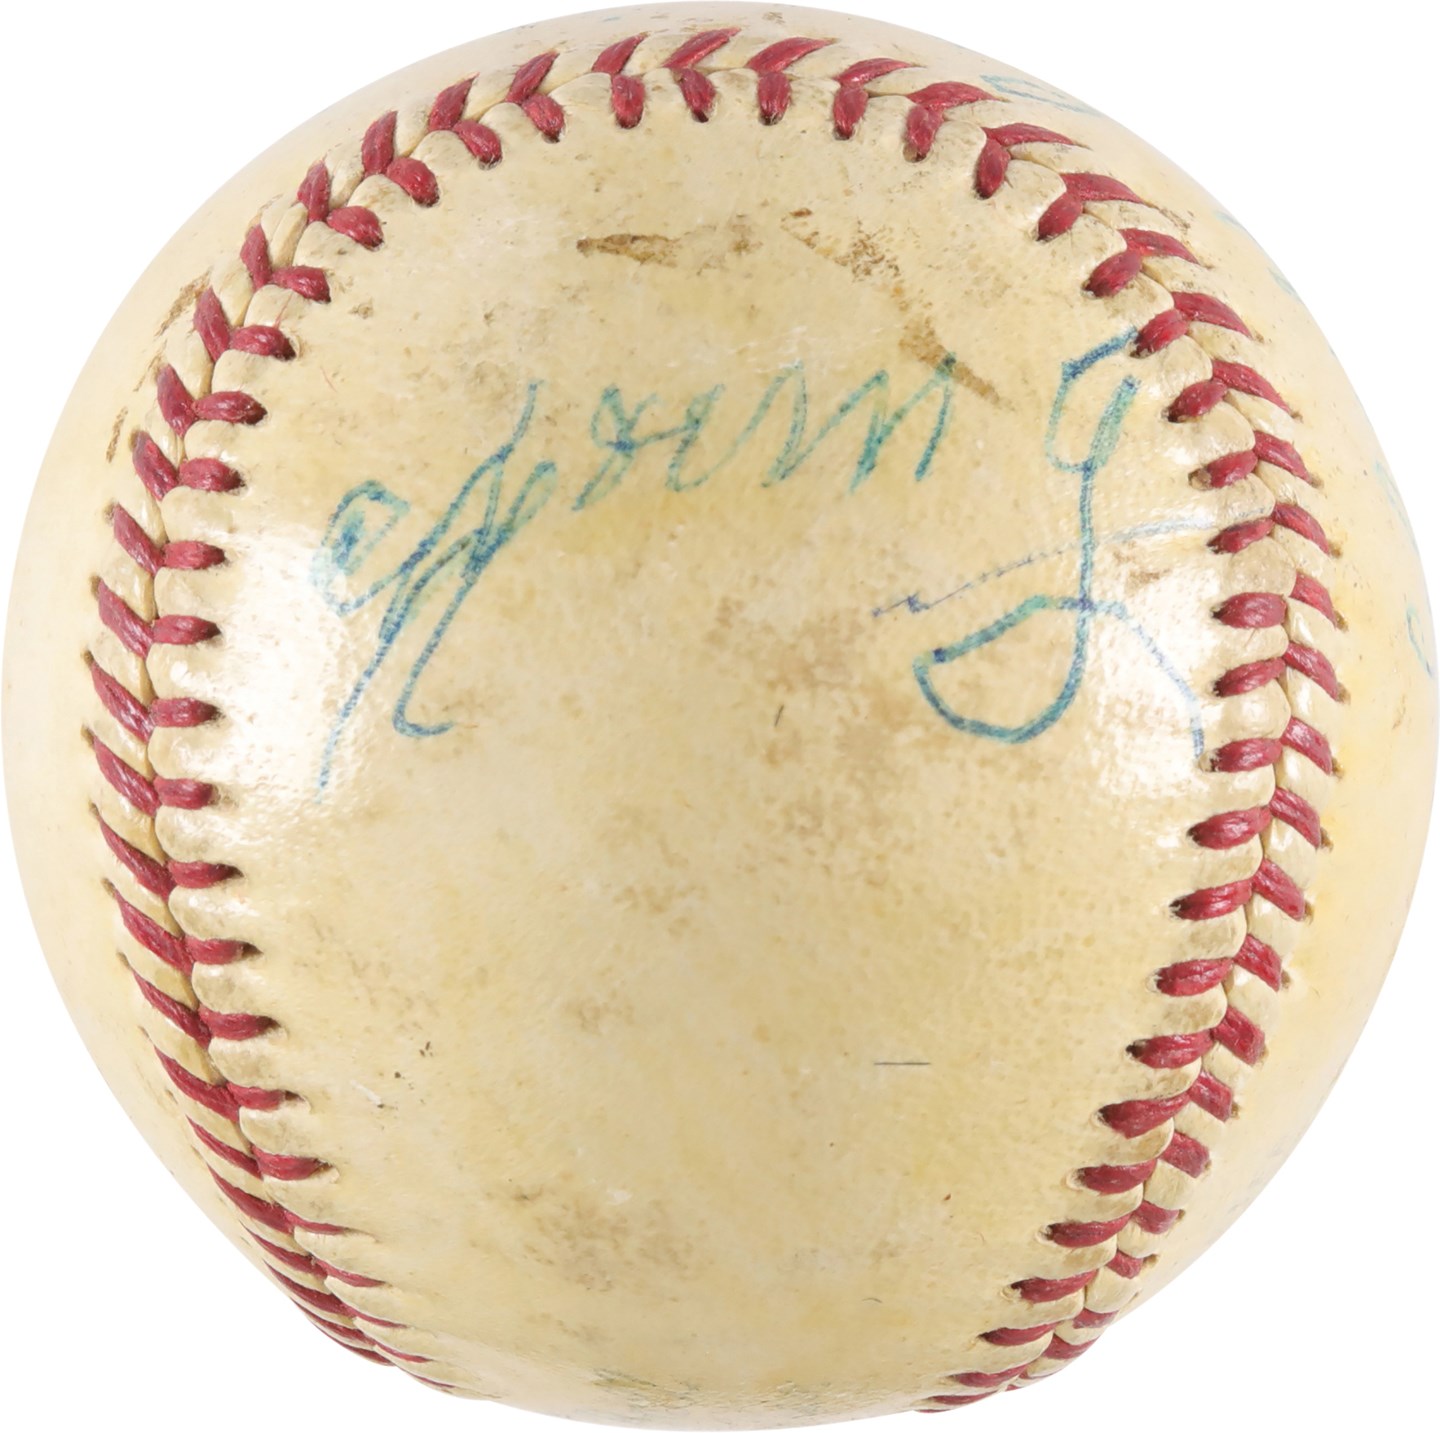 Baseball Autographs - Cy Young and Clark Griffith Dual-Signed Baseball (PSA)